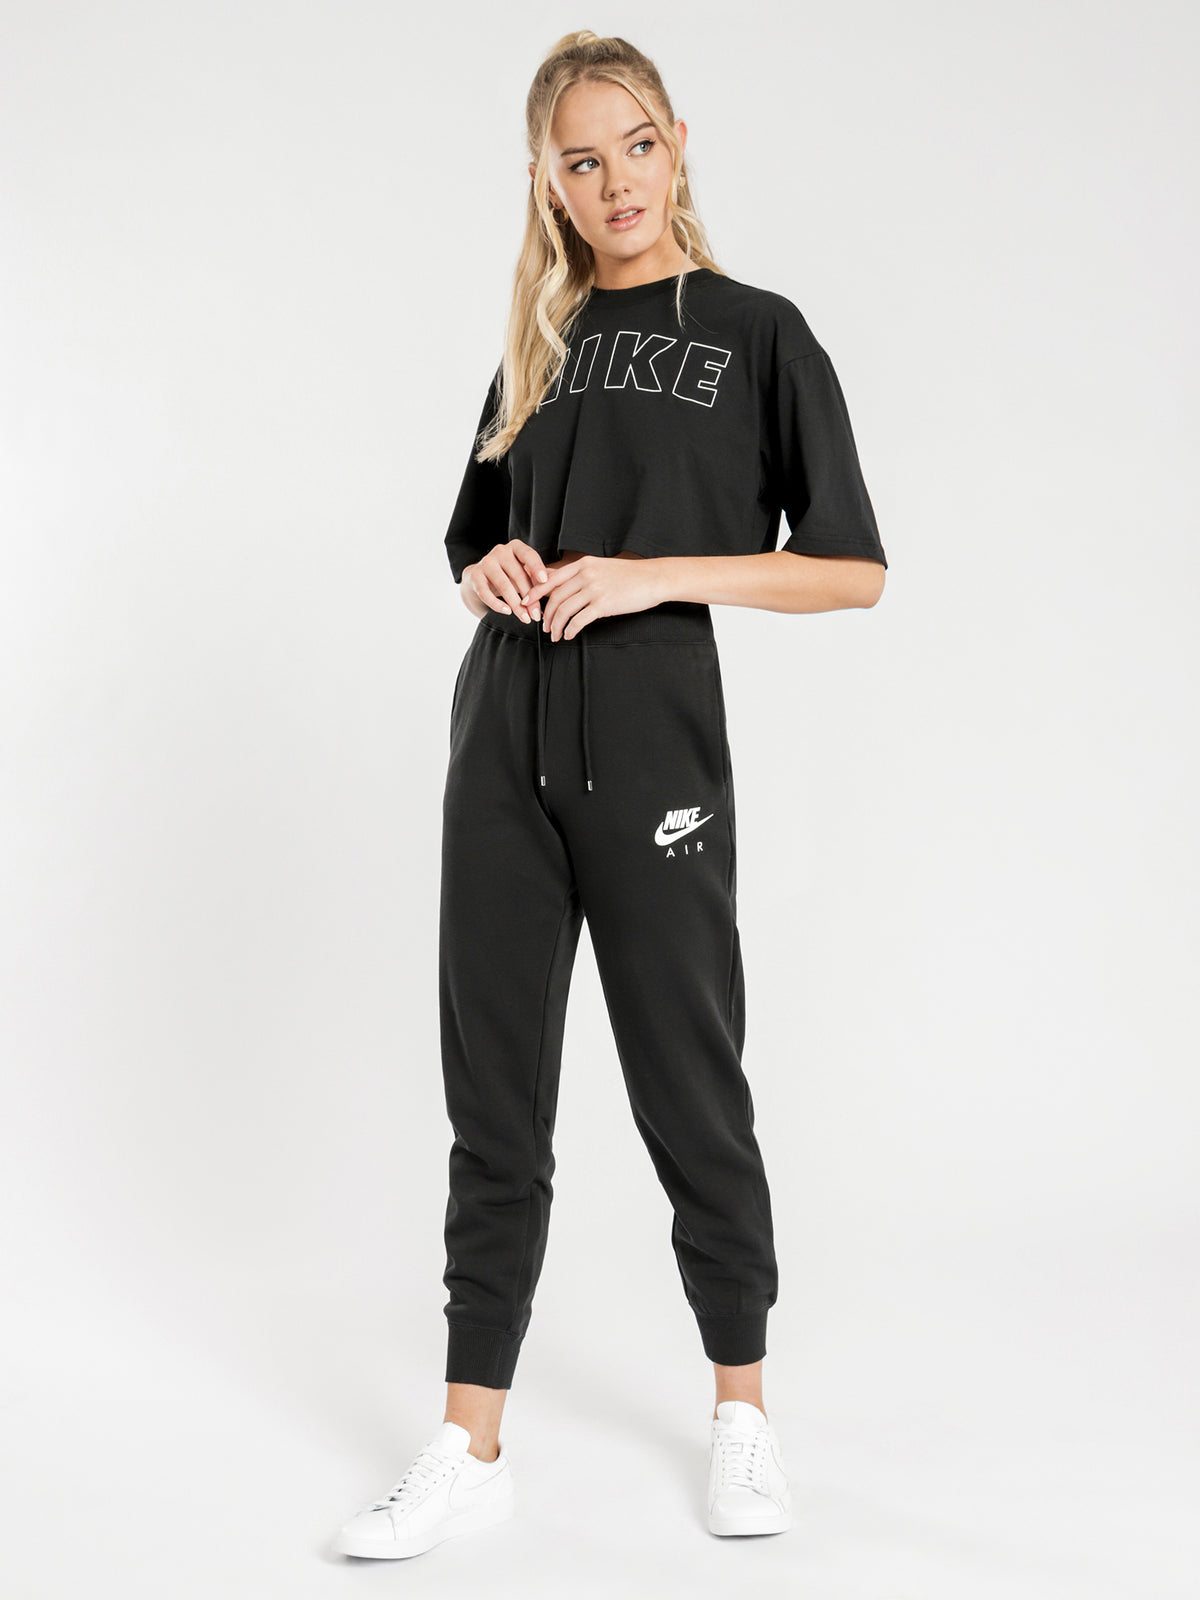 NSW Air Track Pants in Black